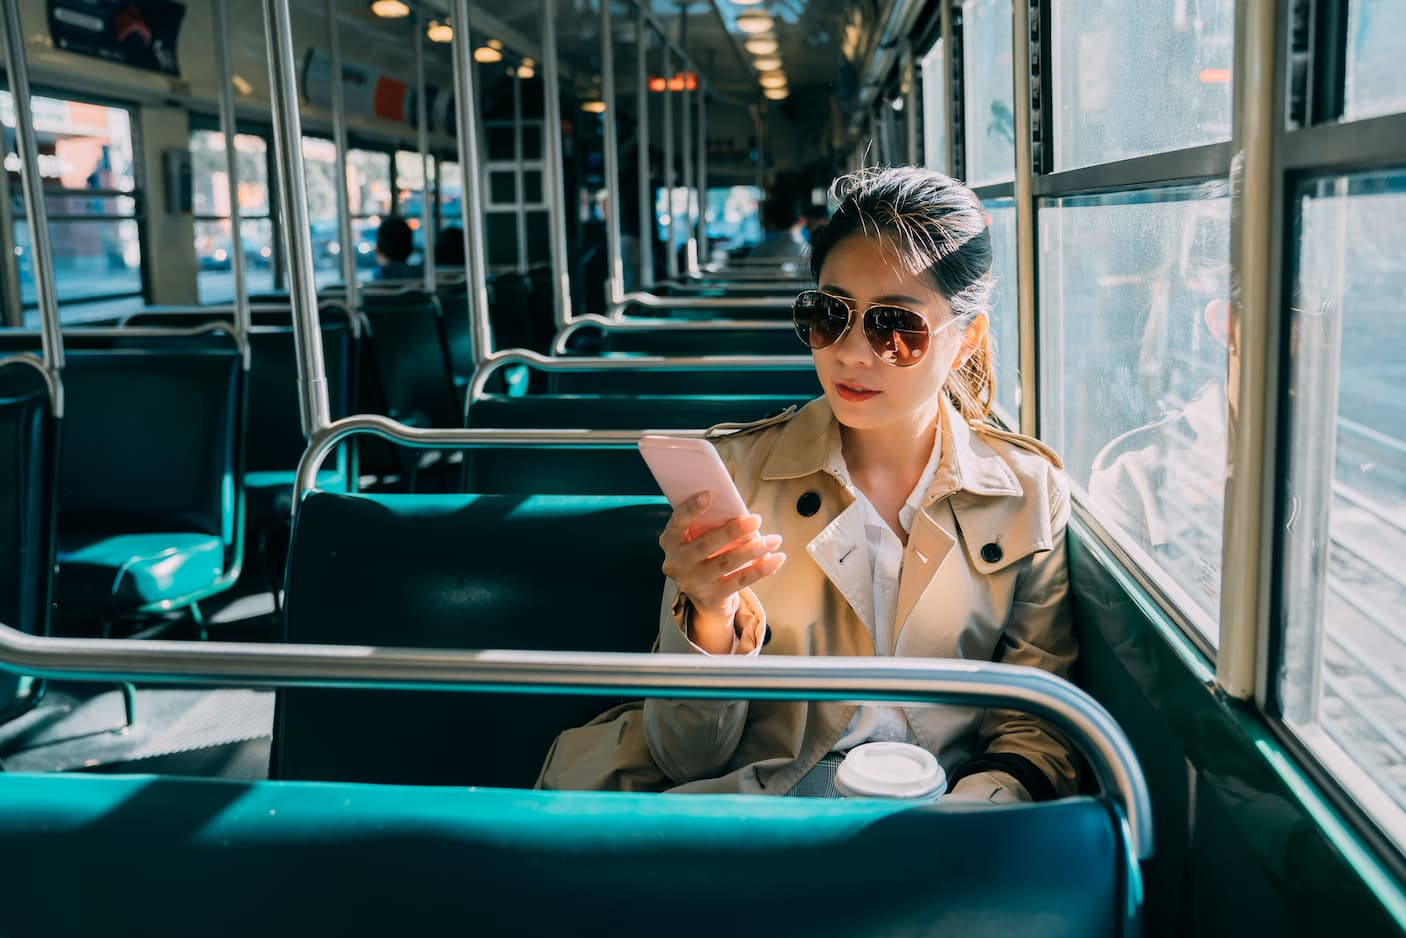 It's easy to make money on your phone by taking surveys on the bus. 